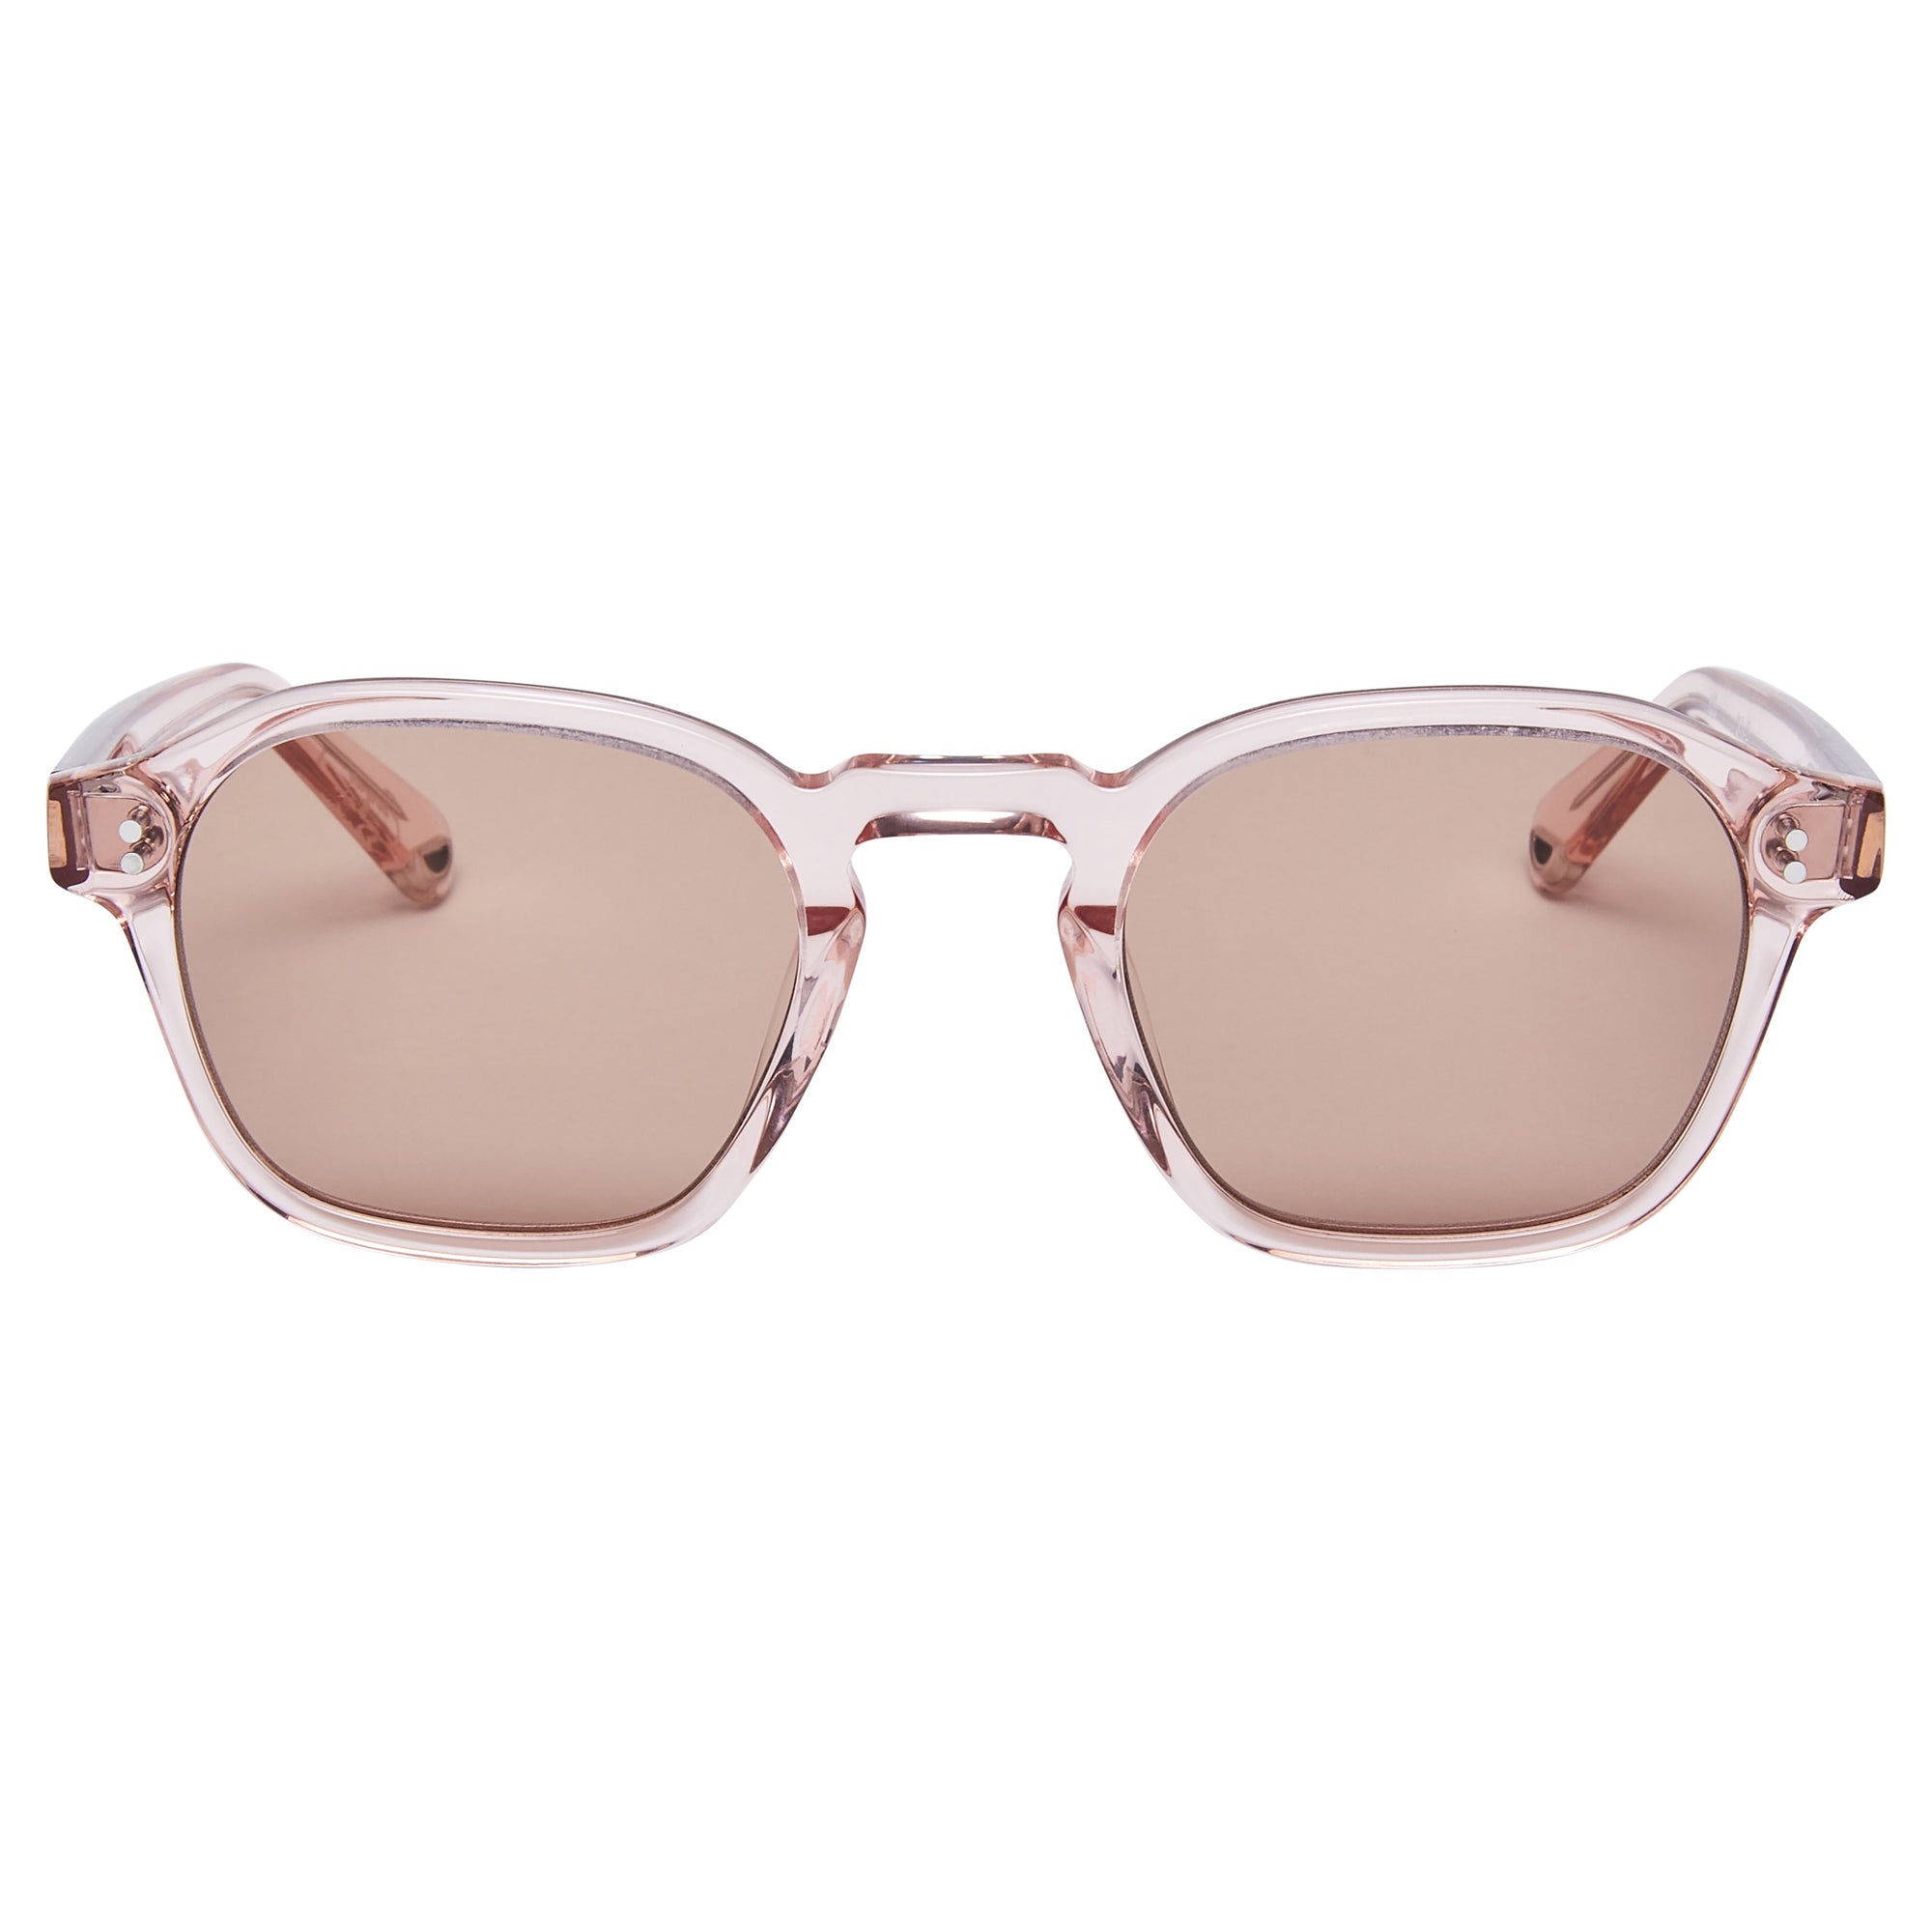 Pacifico Optical Lucius - Capri Pink With Tan Lens